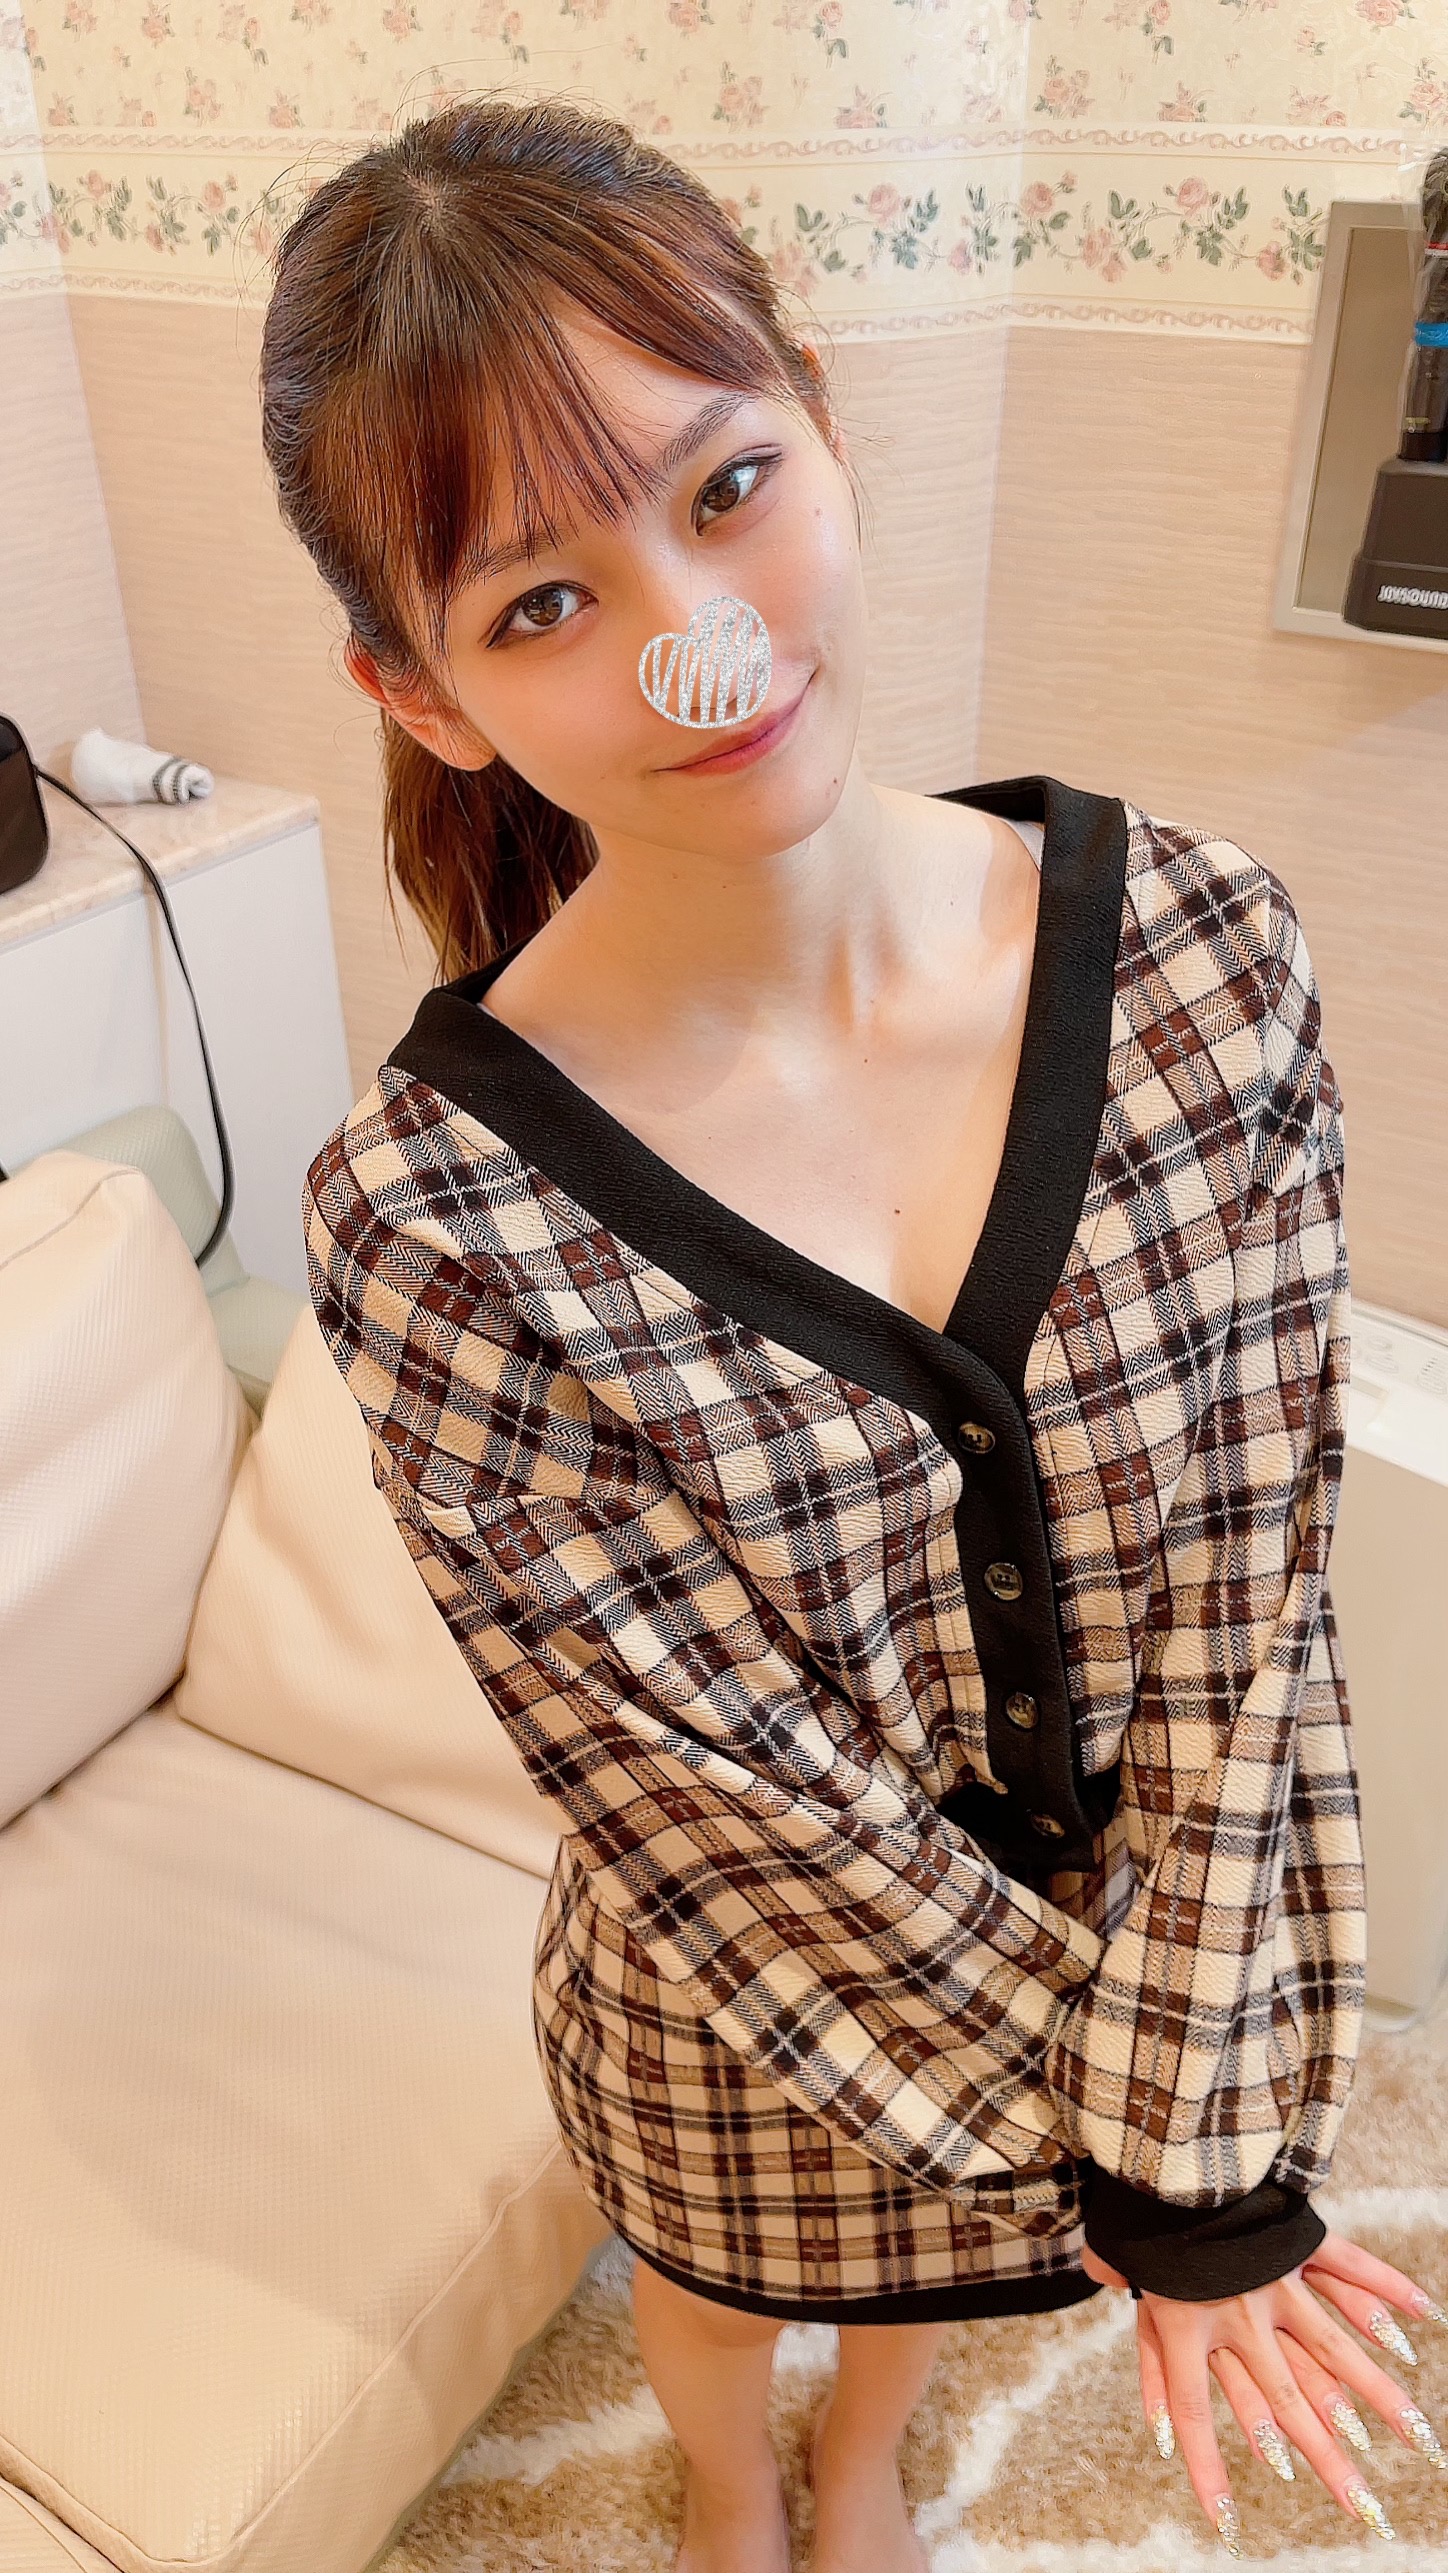 Overwhelming beauty that cant be found even if you look for it Otohas first facial is not only cute but overwhelming erotic big breasts MVP in December is decided by her